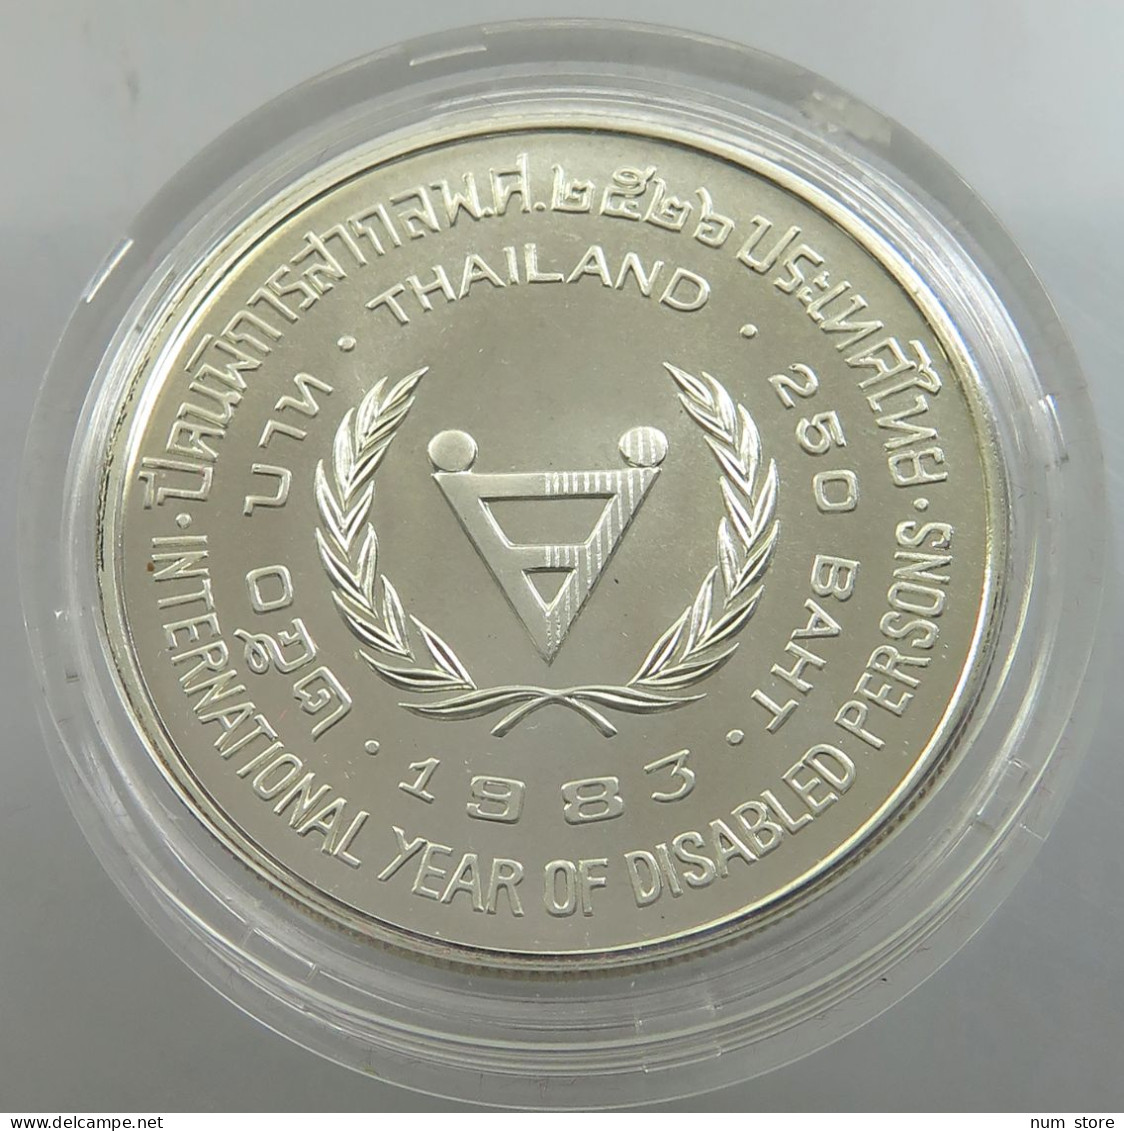 THAILAND 250 BAHT 1983 International Year Of Disabled Persons SILVER UNC #sm14 0045 - Thailand